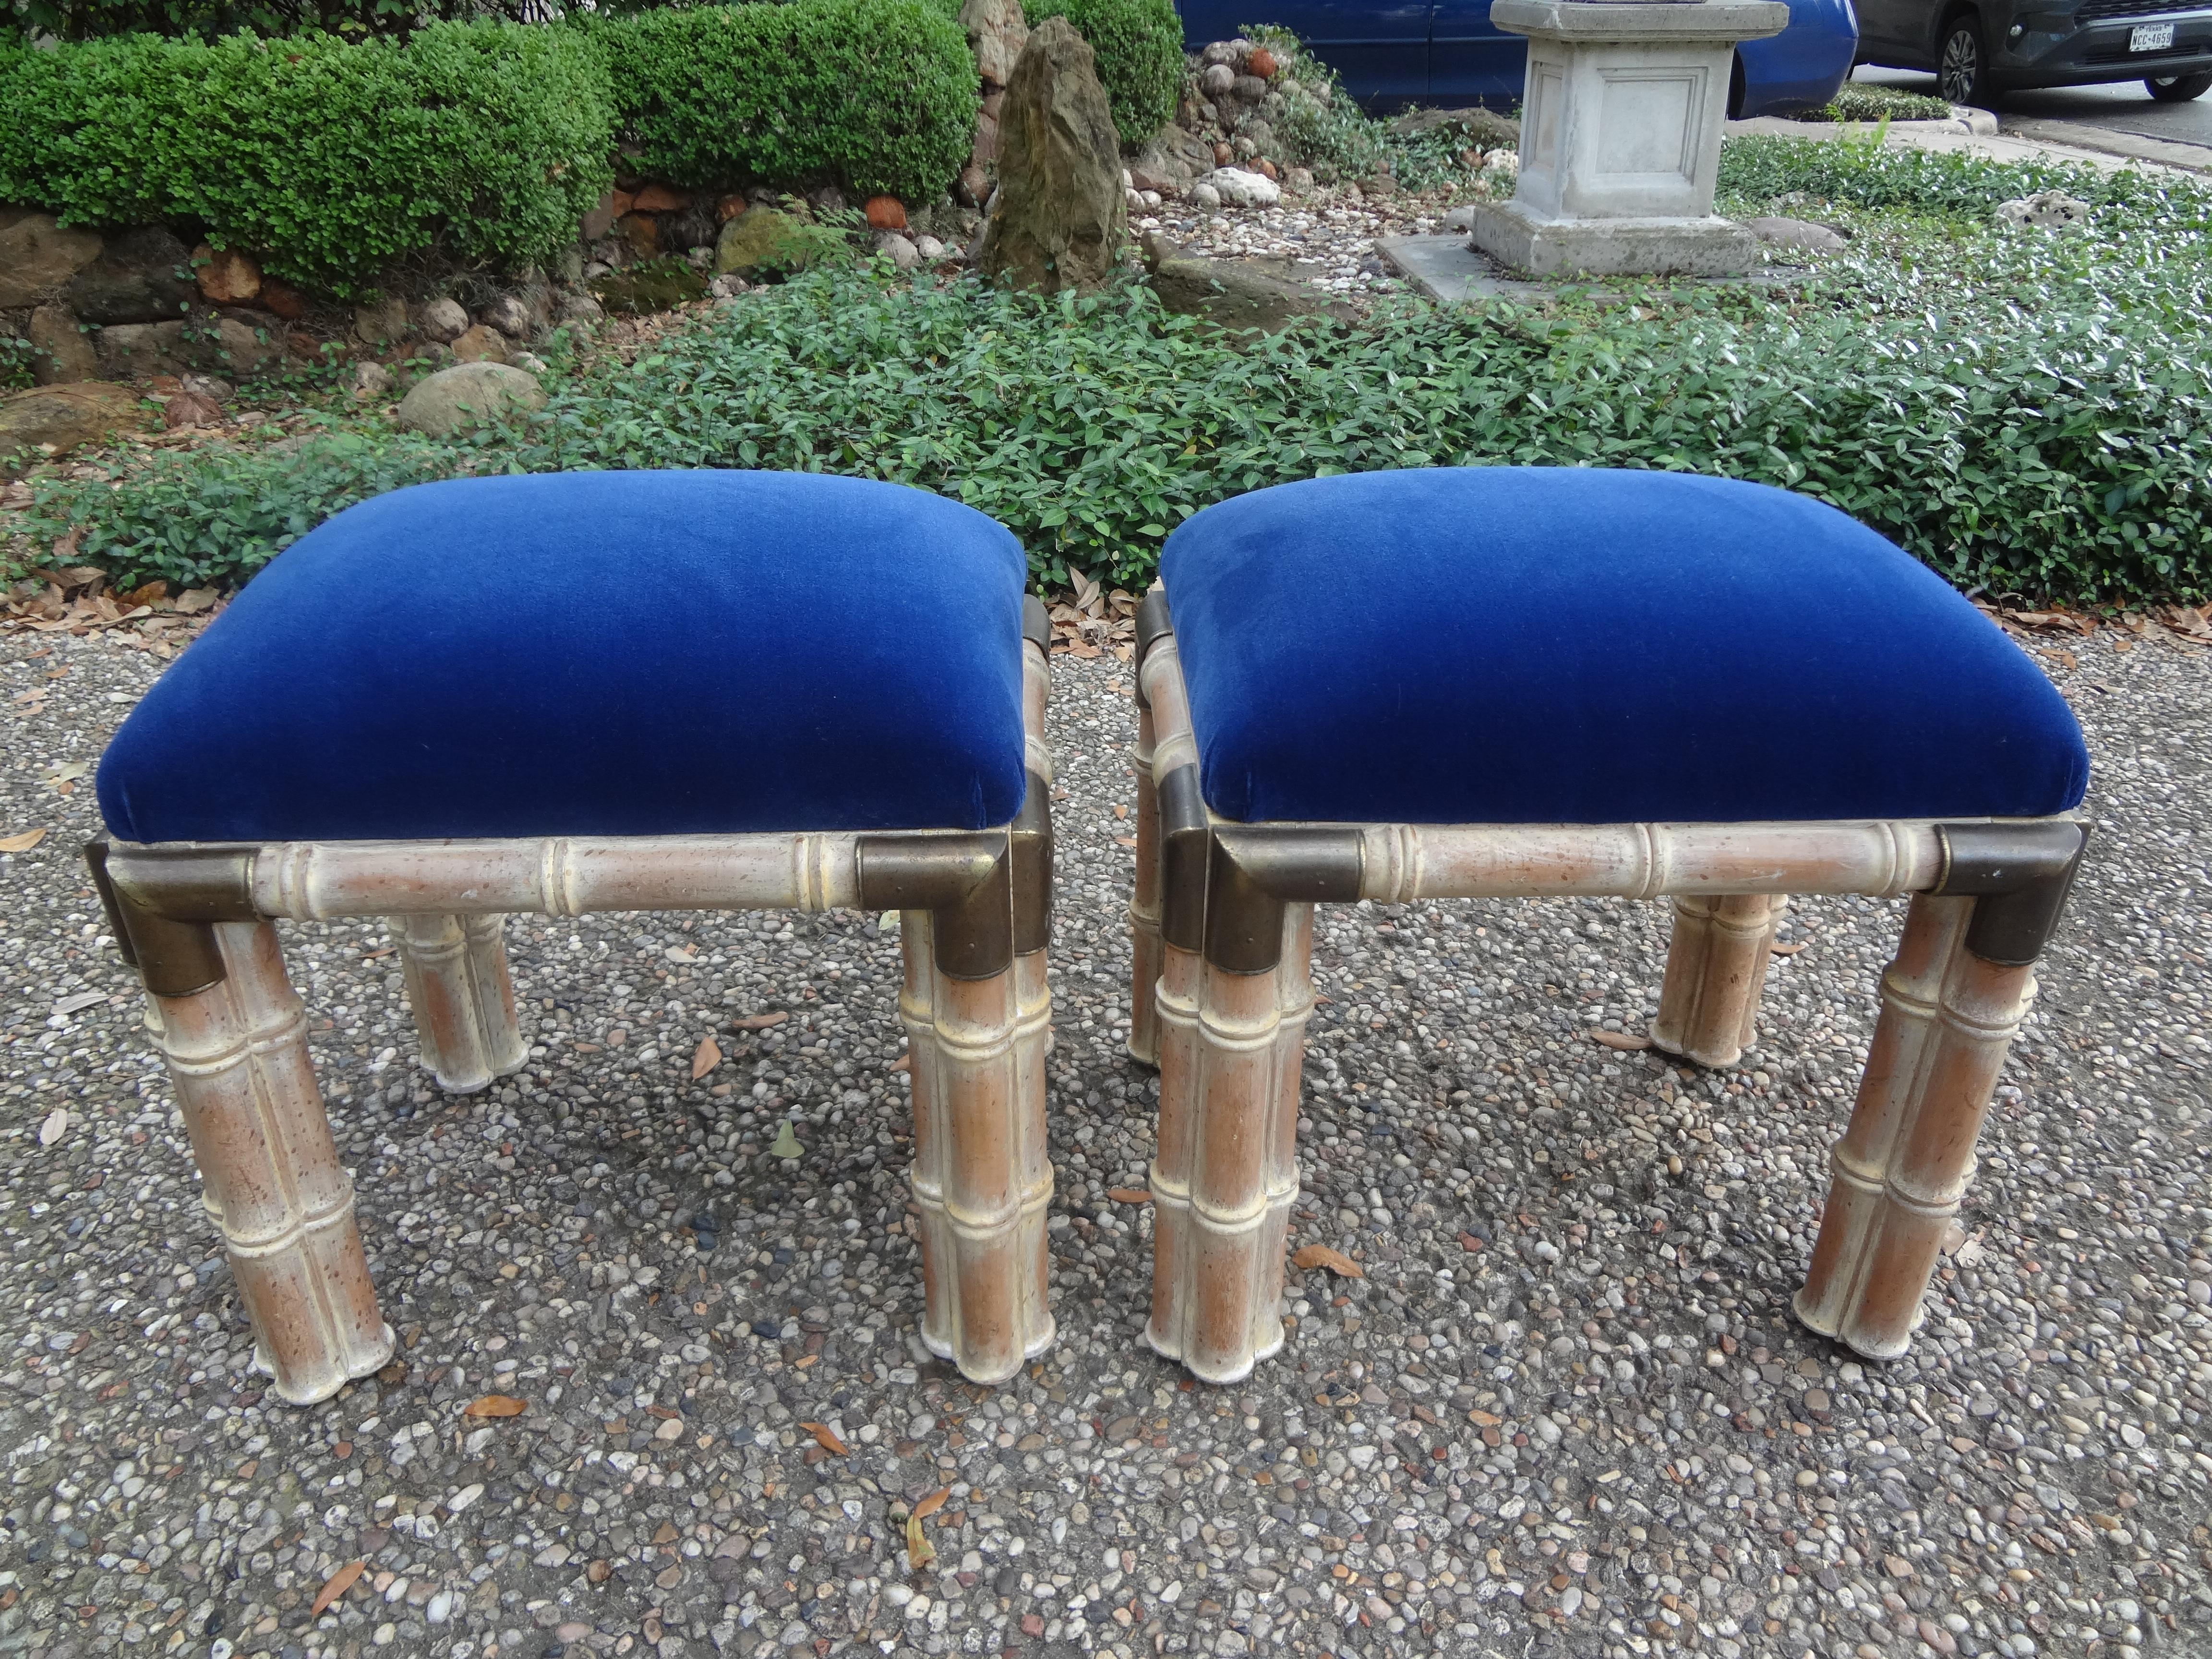 Stunning pair of Hollywood Regency faux bamboo wood ottomans with brass corners. These gorgeous and comfortable mid-century ottomans, benches or stools have been taken down to the frames and professionally upholstered in dark blue mohair. This